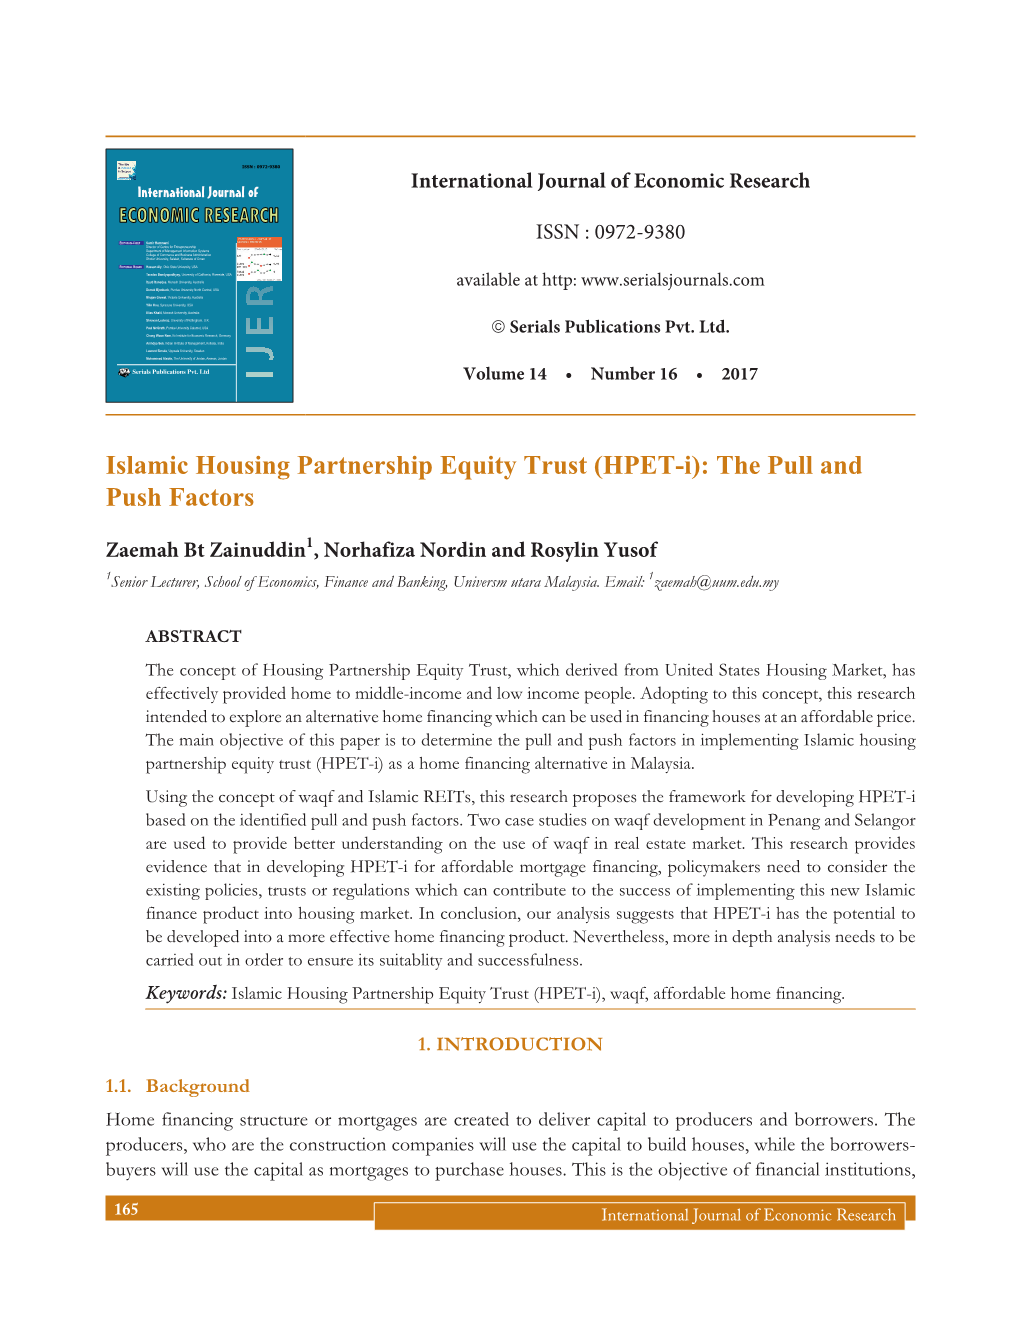 Islamic Housing Partnership Equity Trust (HPET-I): the Pull and Push Factors